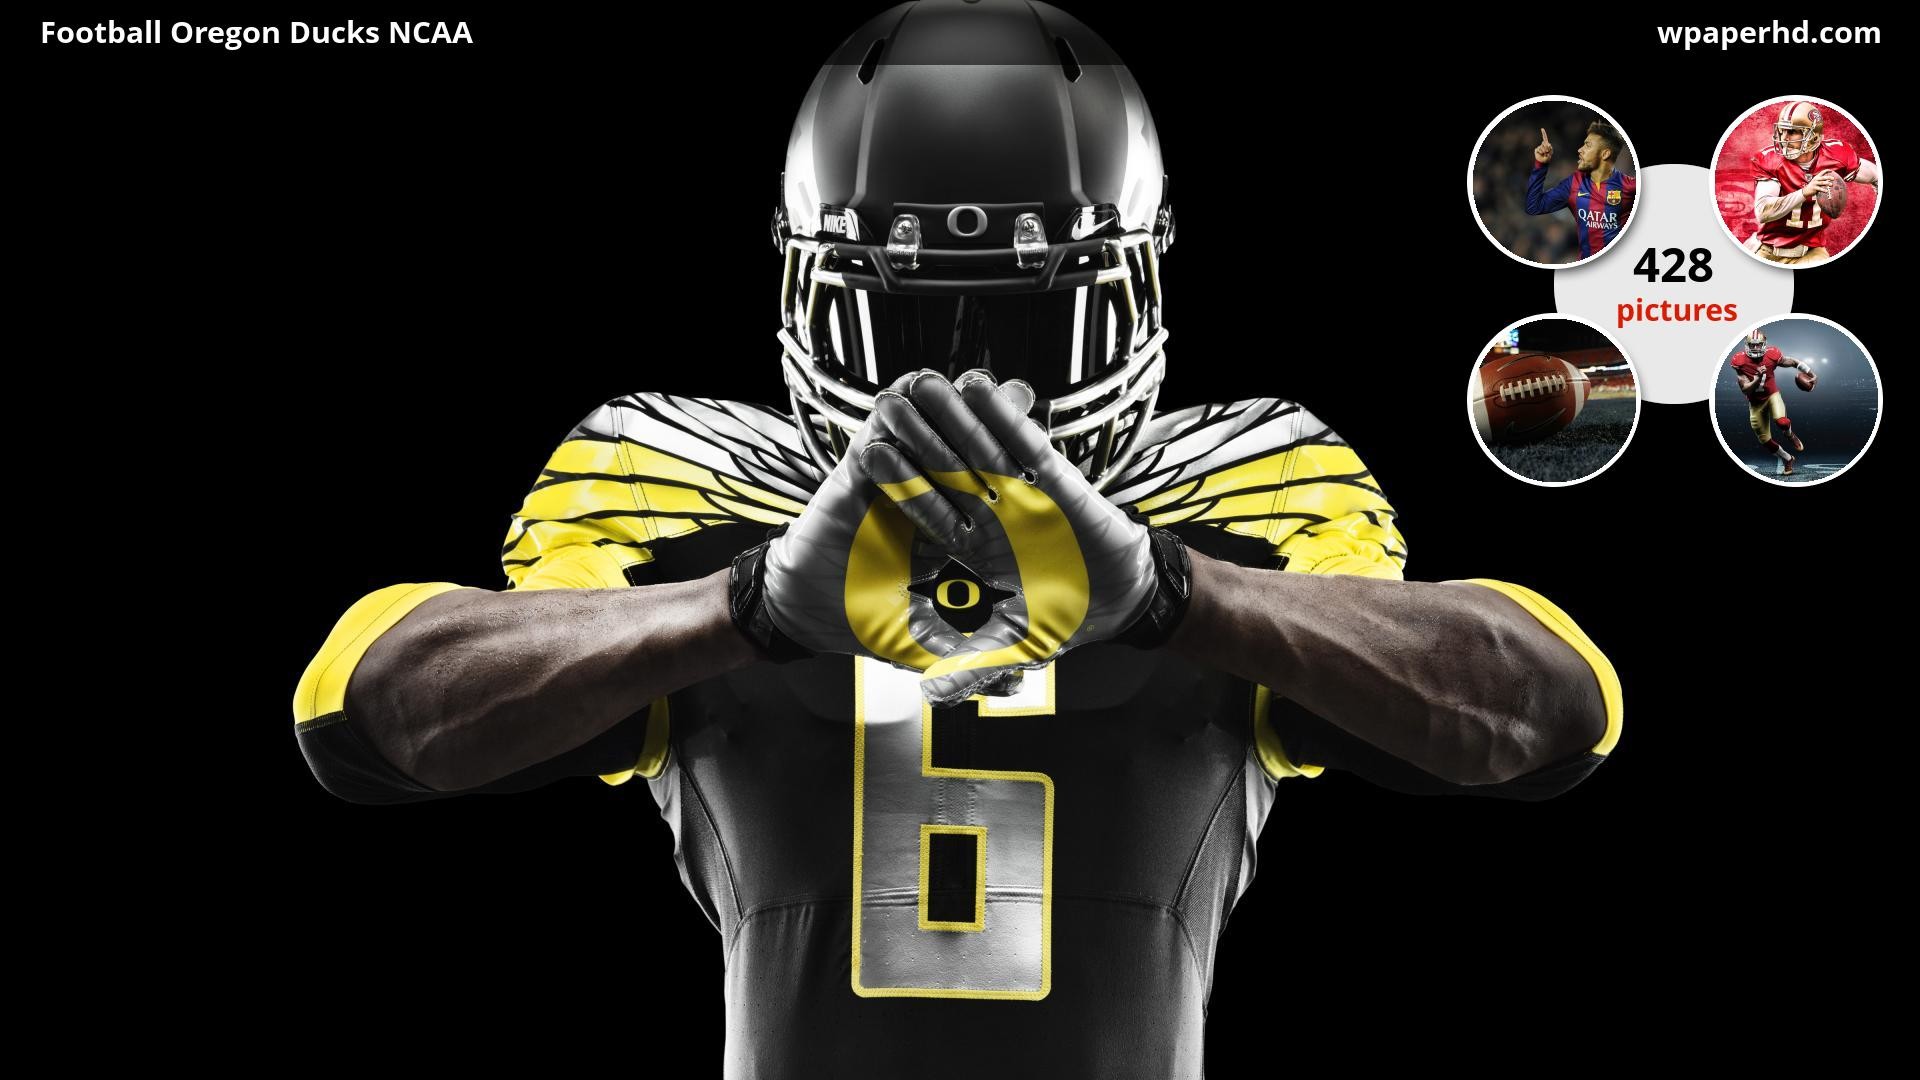 1920x1080 You are on page with Football Oregon Ducks NCAA wallpaper, where you can  download this picture in Original size and ...